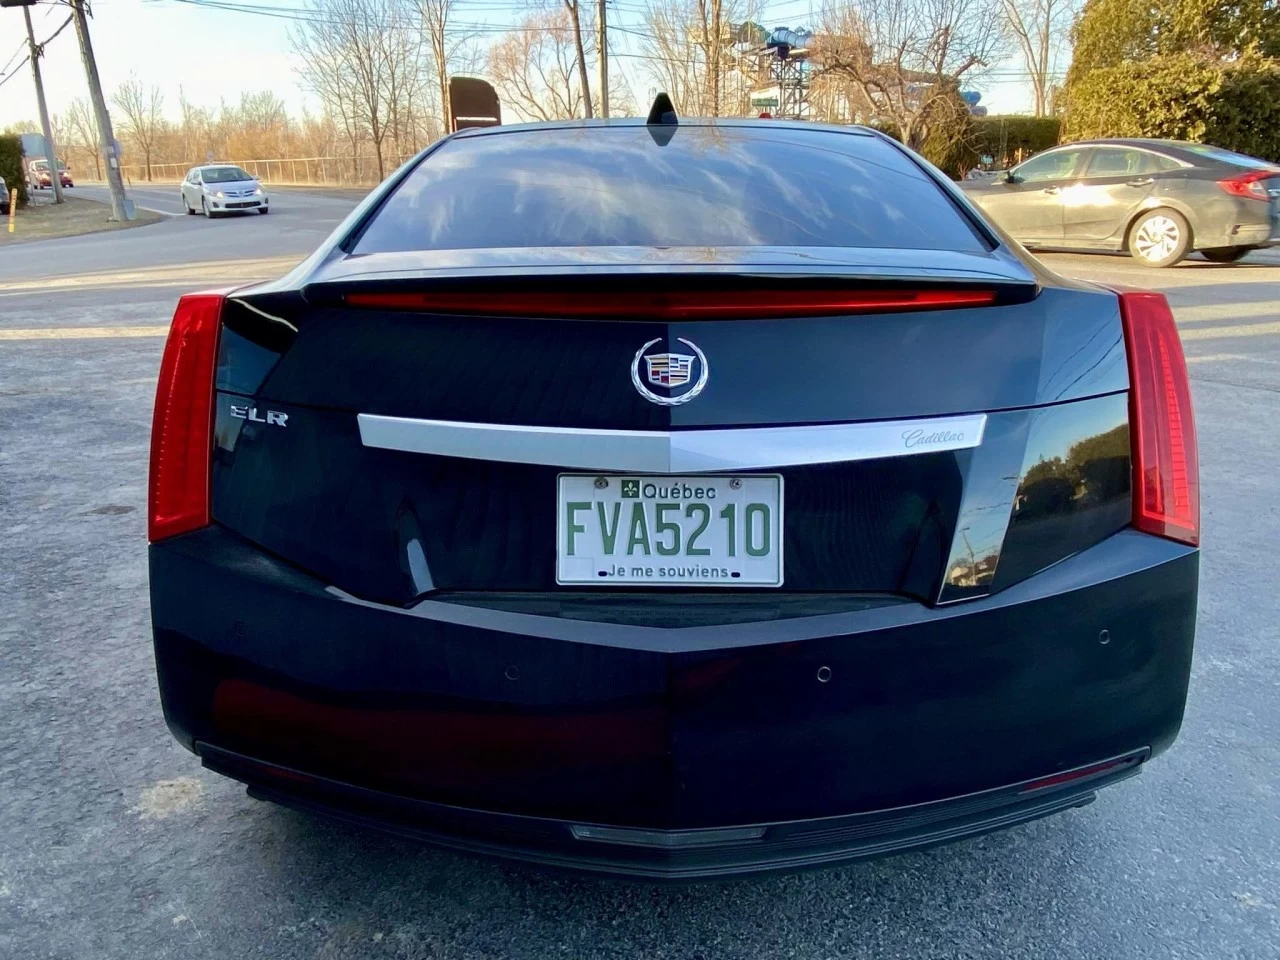 2014 CADILLAC ELR COUPE / PHEV - PLUG IN HYBRID ELECTRIC VEHICULE  Main Image